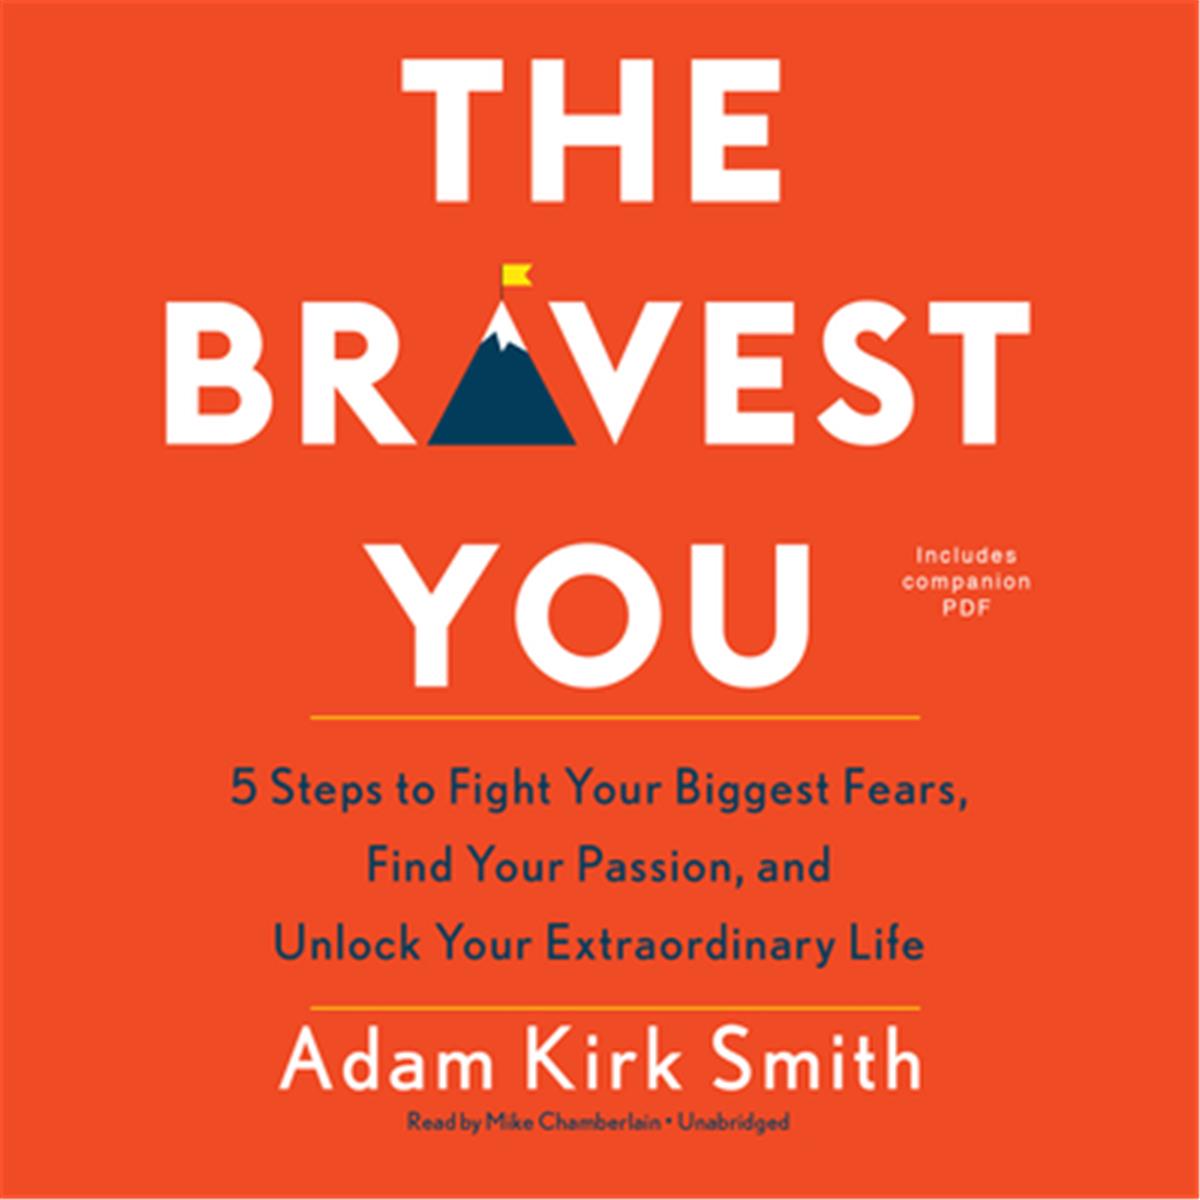 9781441702784 The Bravest You Audio Book